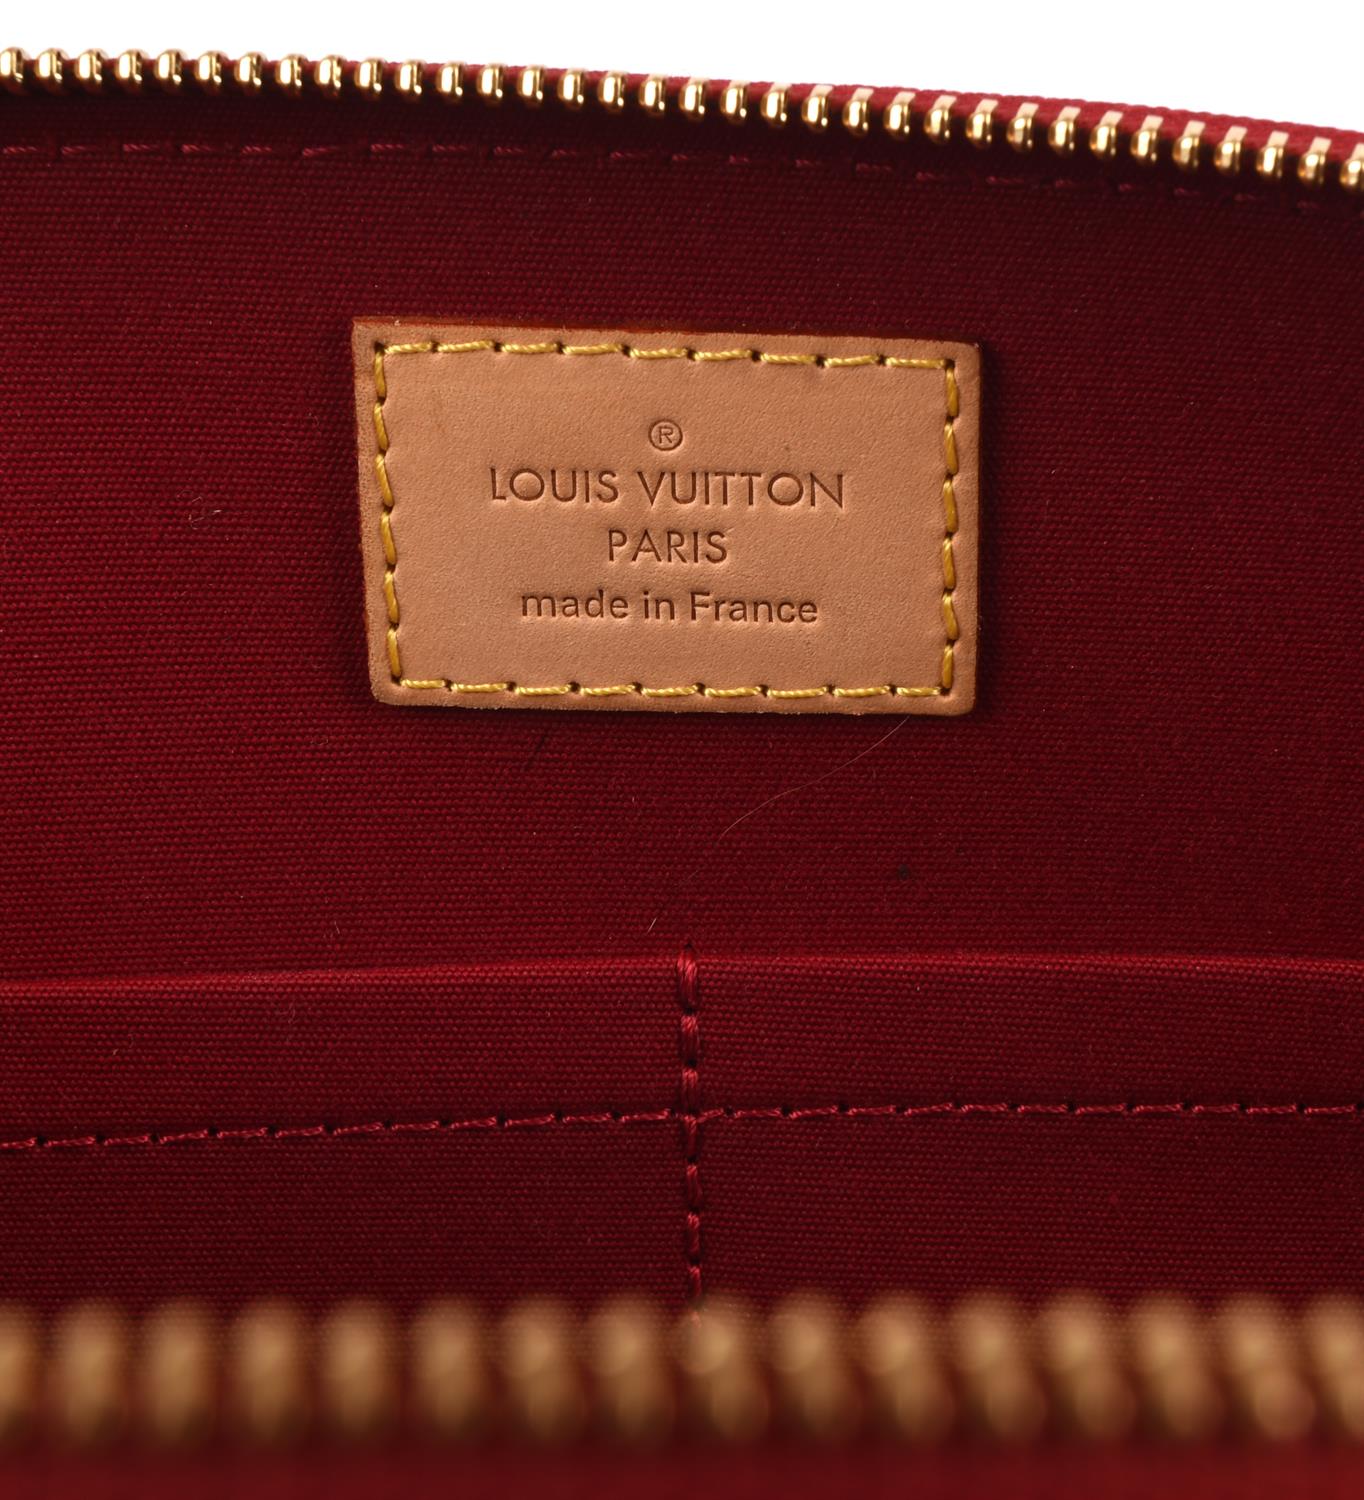 LOUIS VUITTON lipstick red Vernis varnished leather French Montana handbag with gold coloured - Image 8 of 8